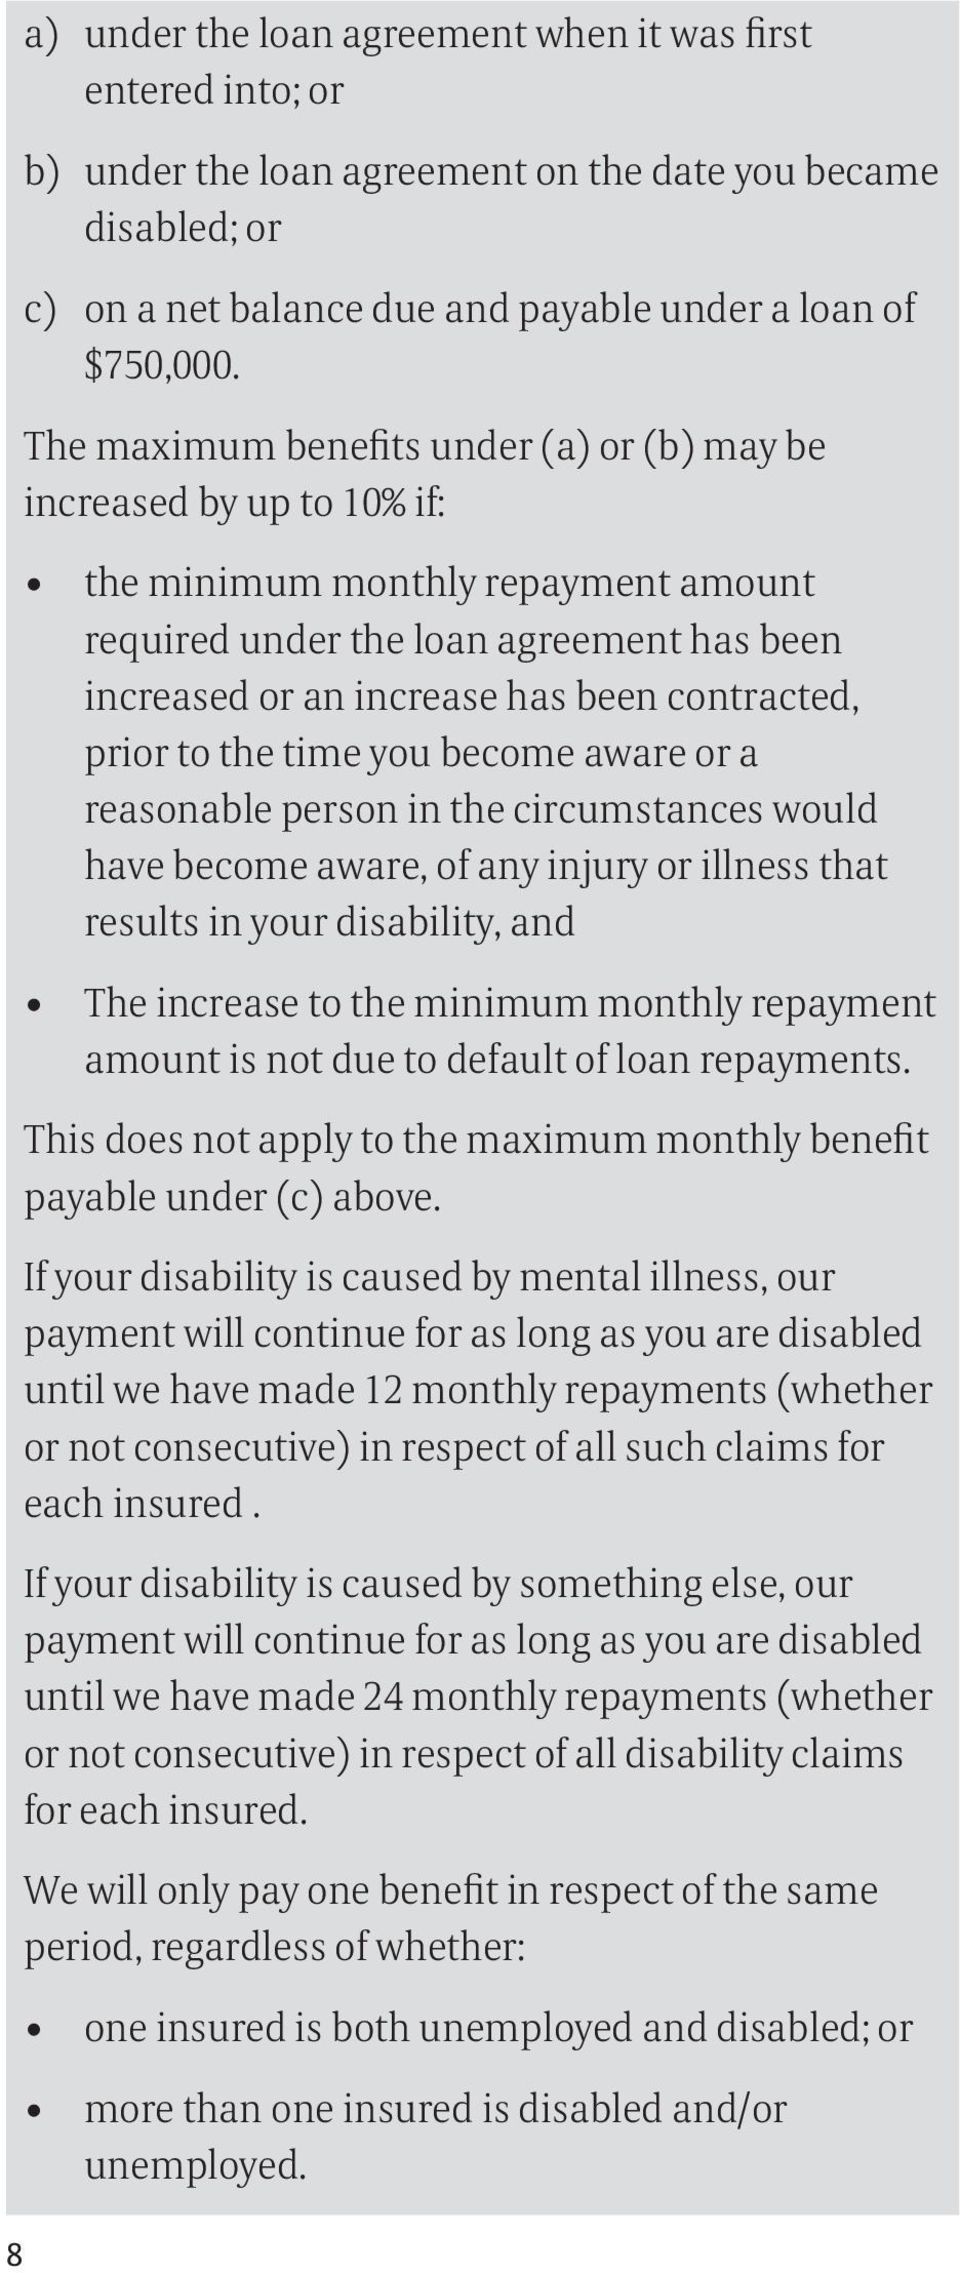 prior to the time you become aware or a reasonable person in the circumstances would have become aware, of any injury or illness that results in your disability, and The increase to the minimum